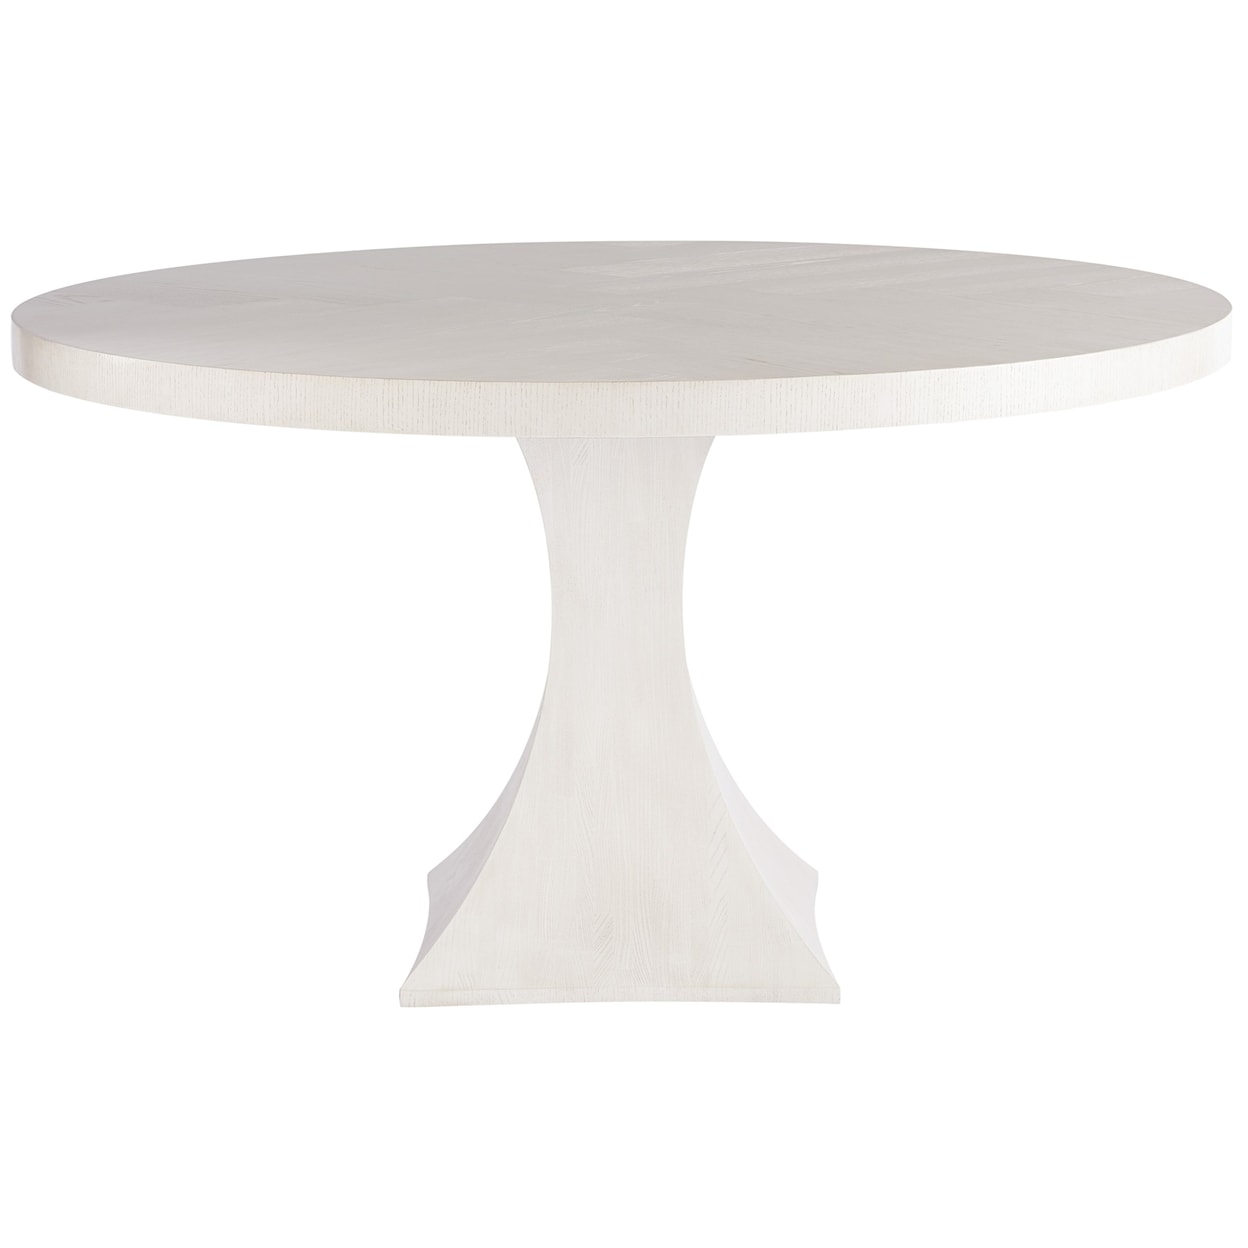 Universal Paradox Integrity Dining Table